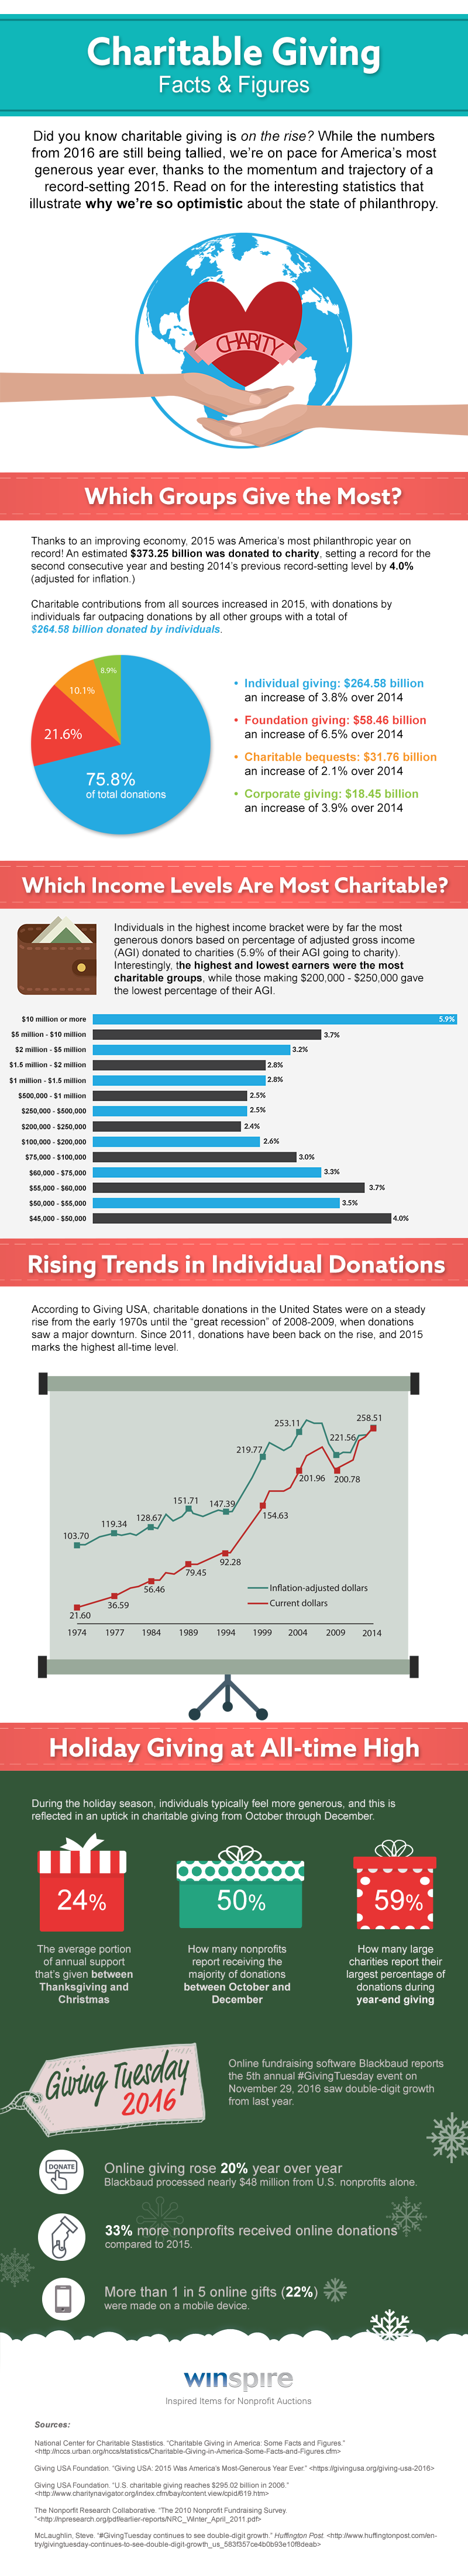 charitable-giving-facts-and-figures-infographic.png